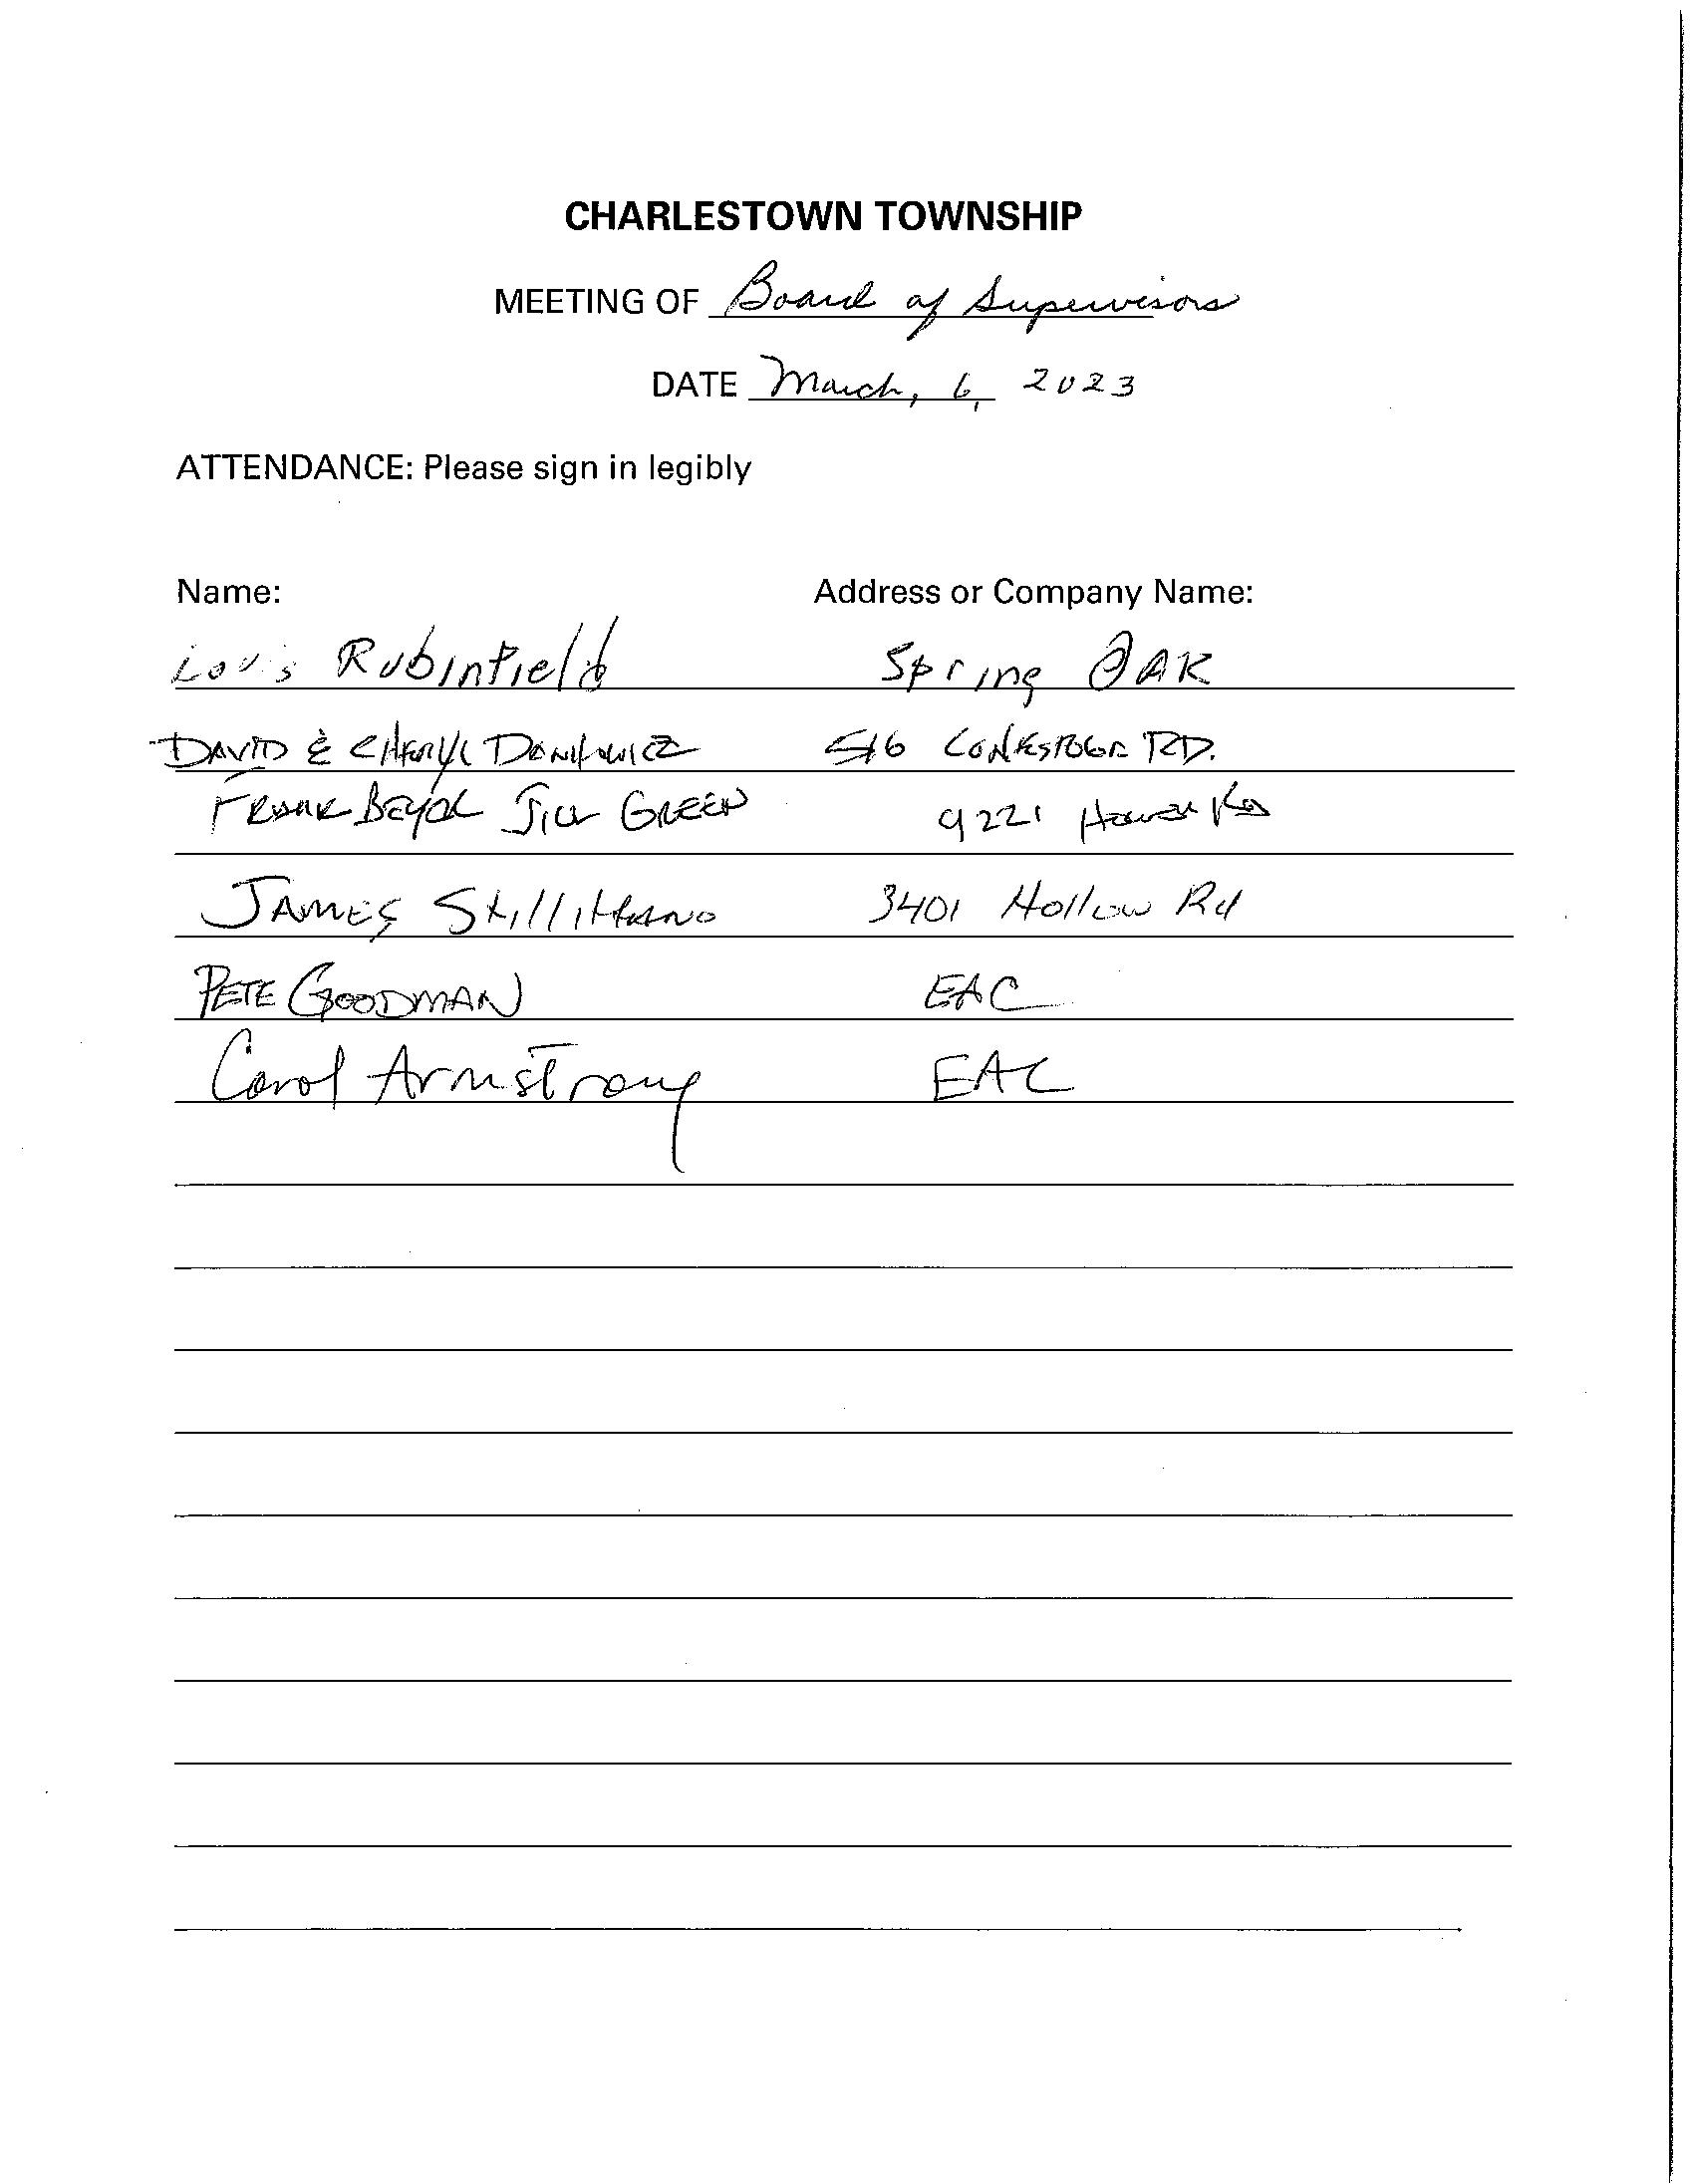 Sign-in sheet, 3/6/2023